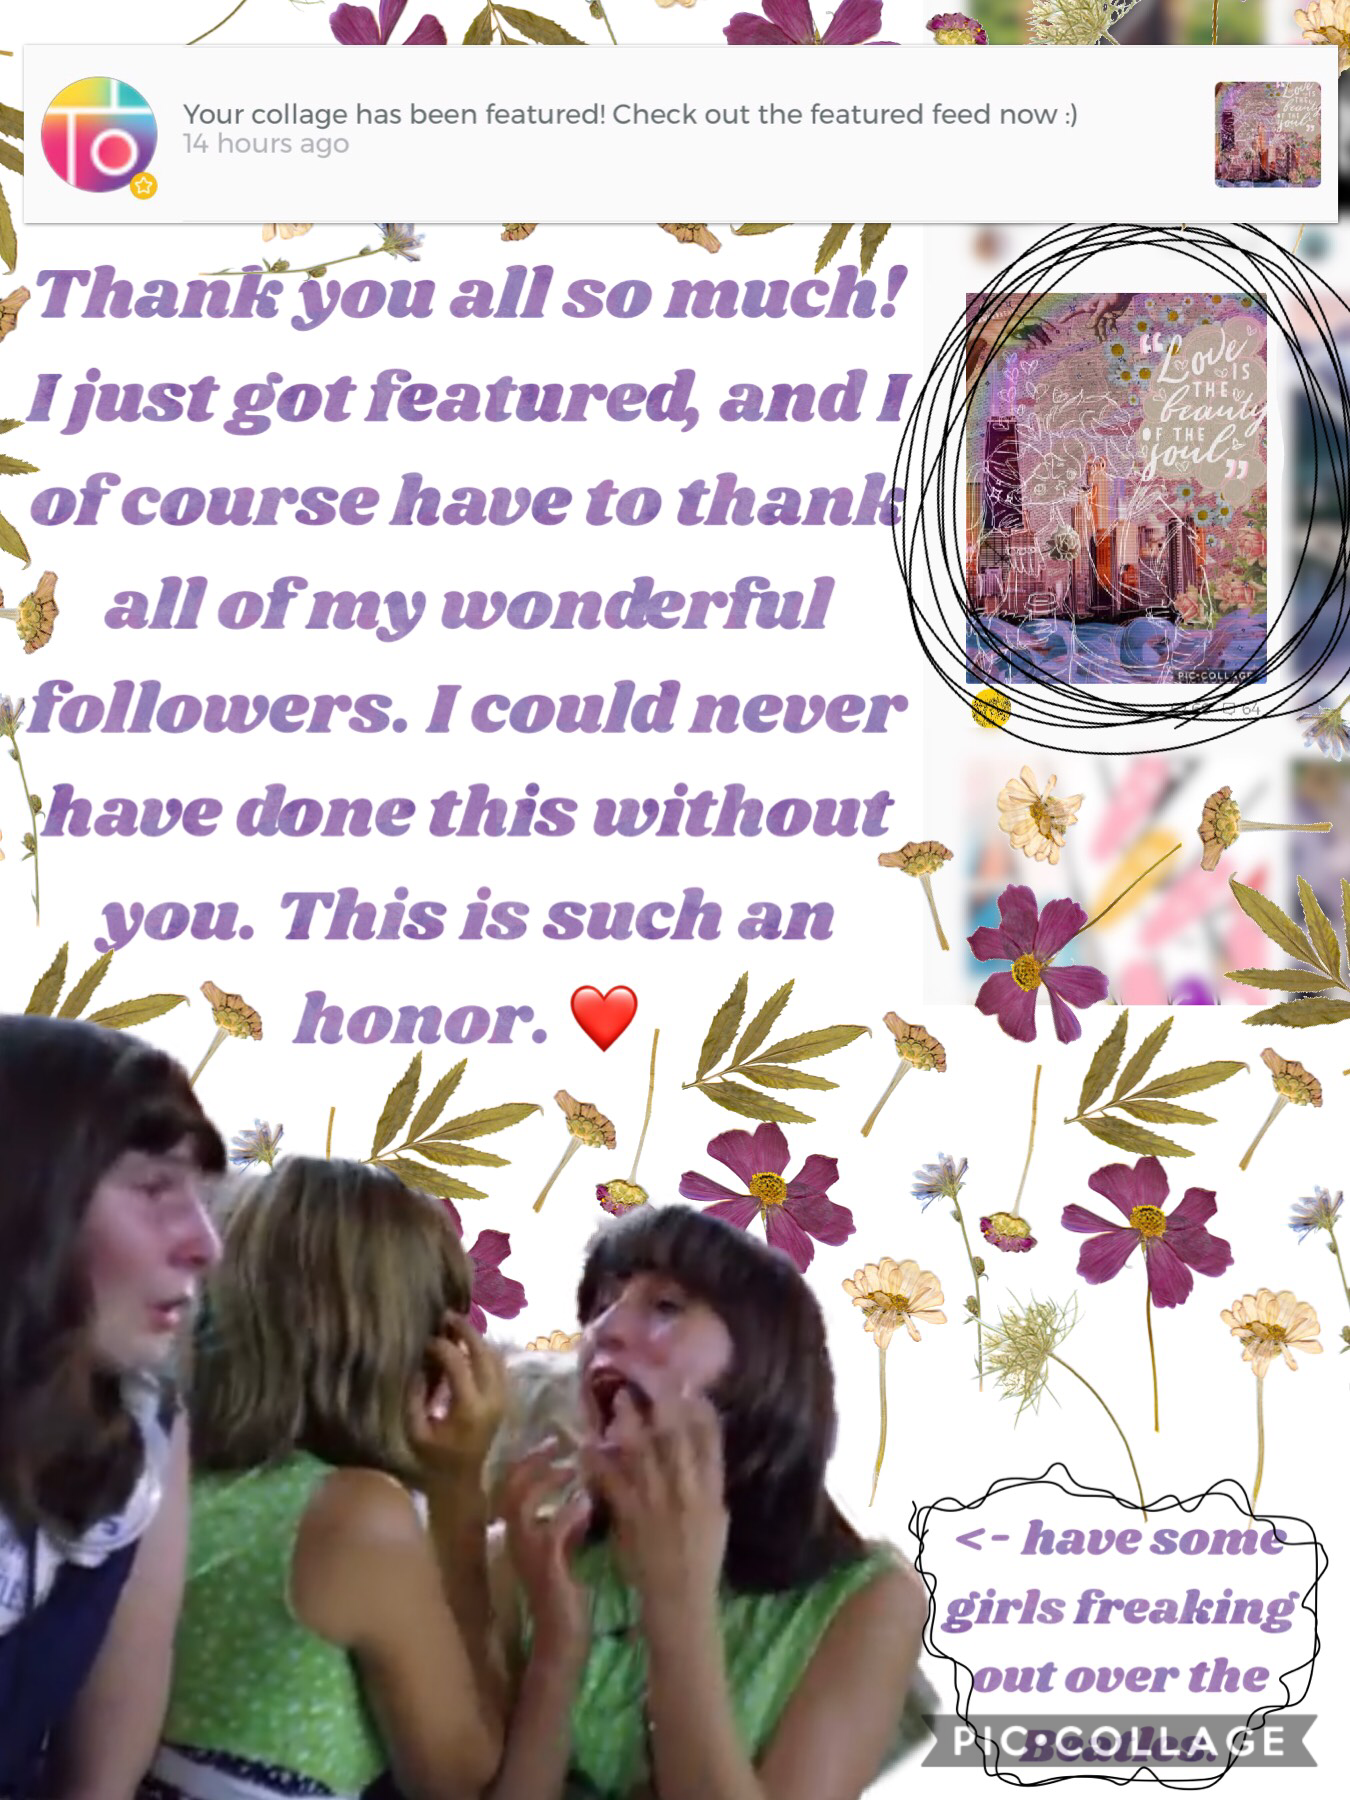 🎉❤️This is my second time getting randomly featured on my account, (as in not joining a PicCollage contest) so thank you everyone. ❤️🎉










I think I’ve caught Beatlemania (wow over 50 years late to the party)